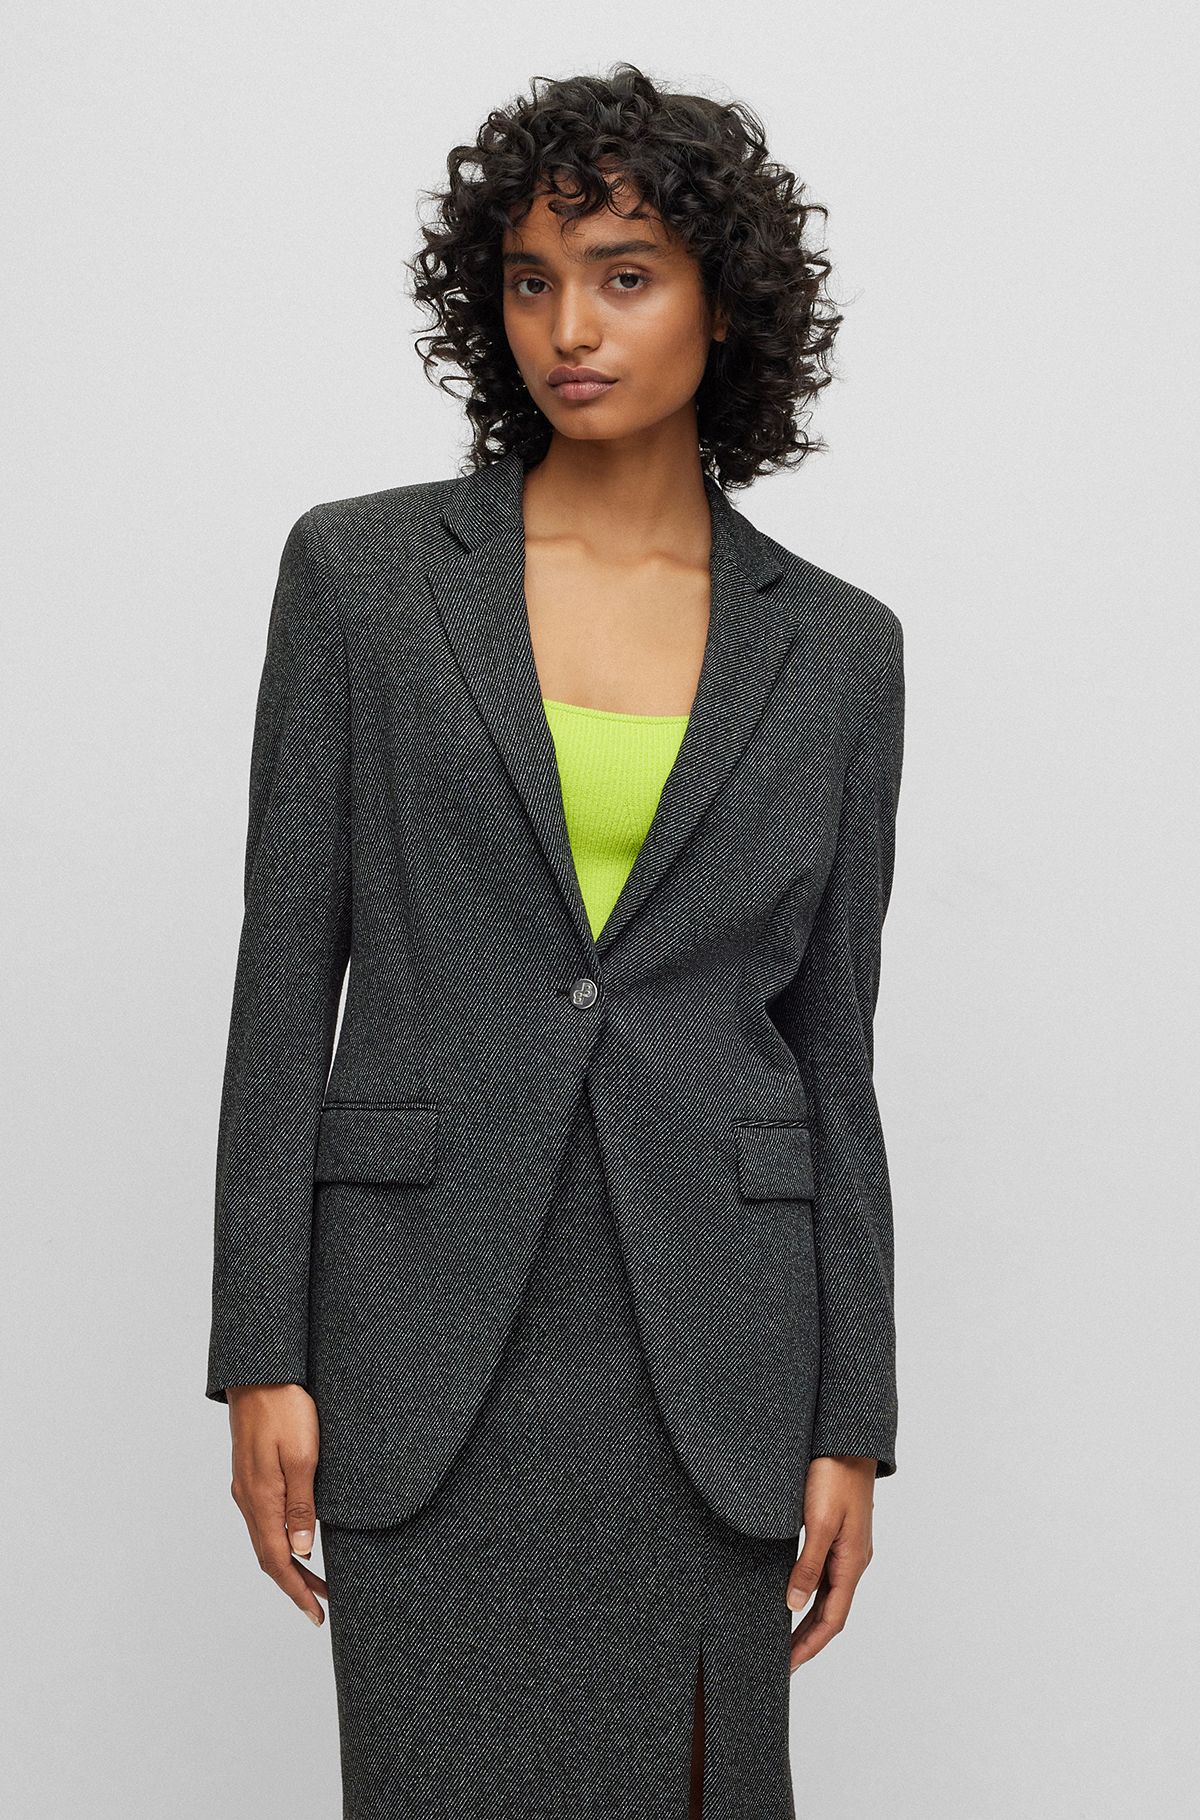 Slim-fit jacket in heavyweight woven cloth, Patterned